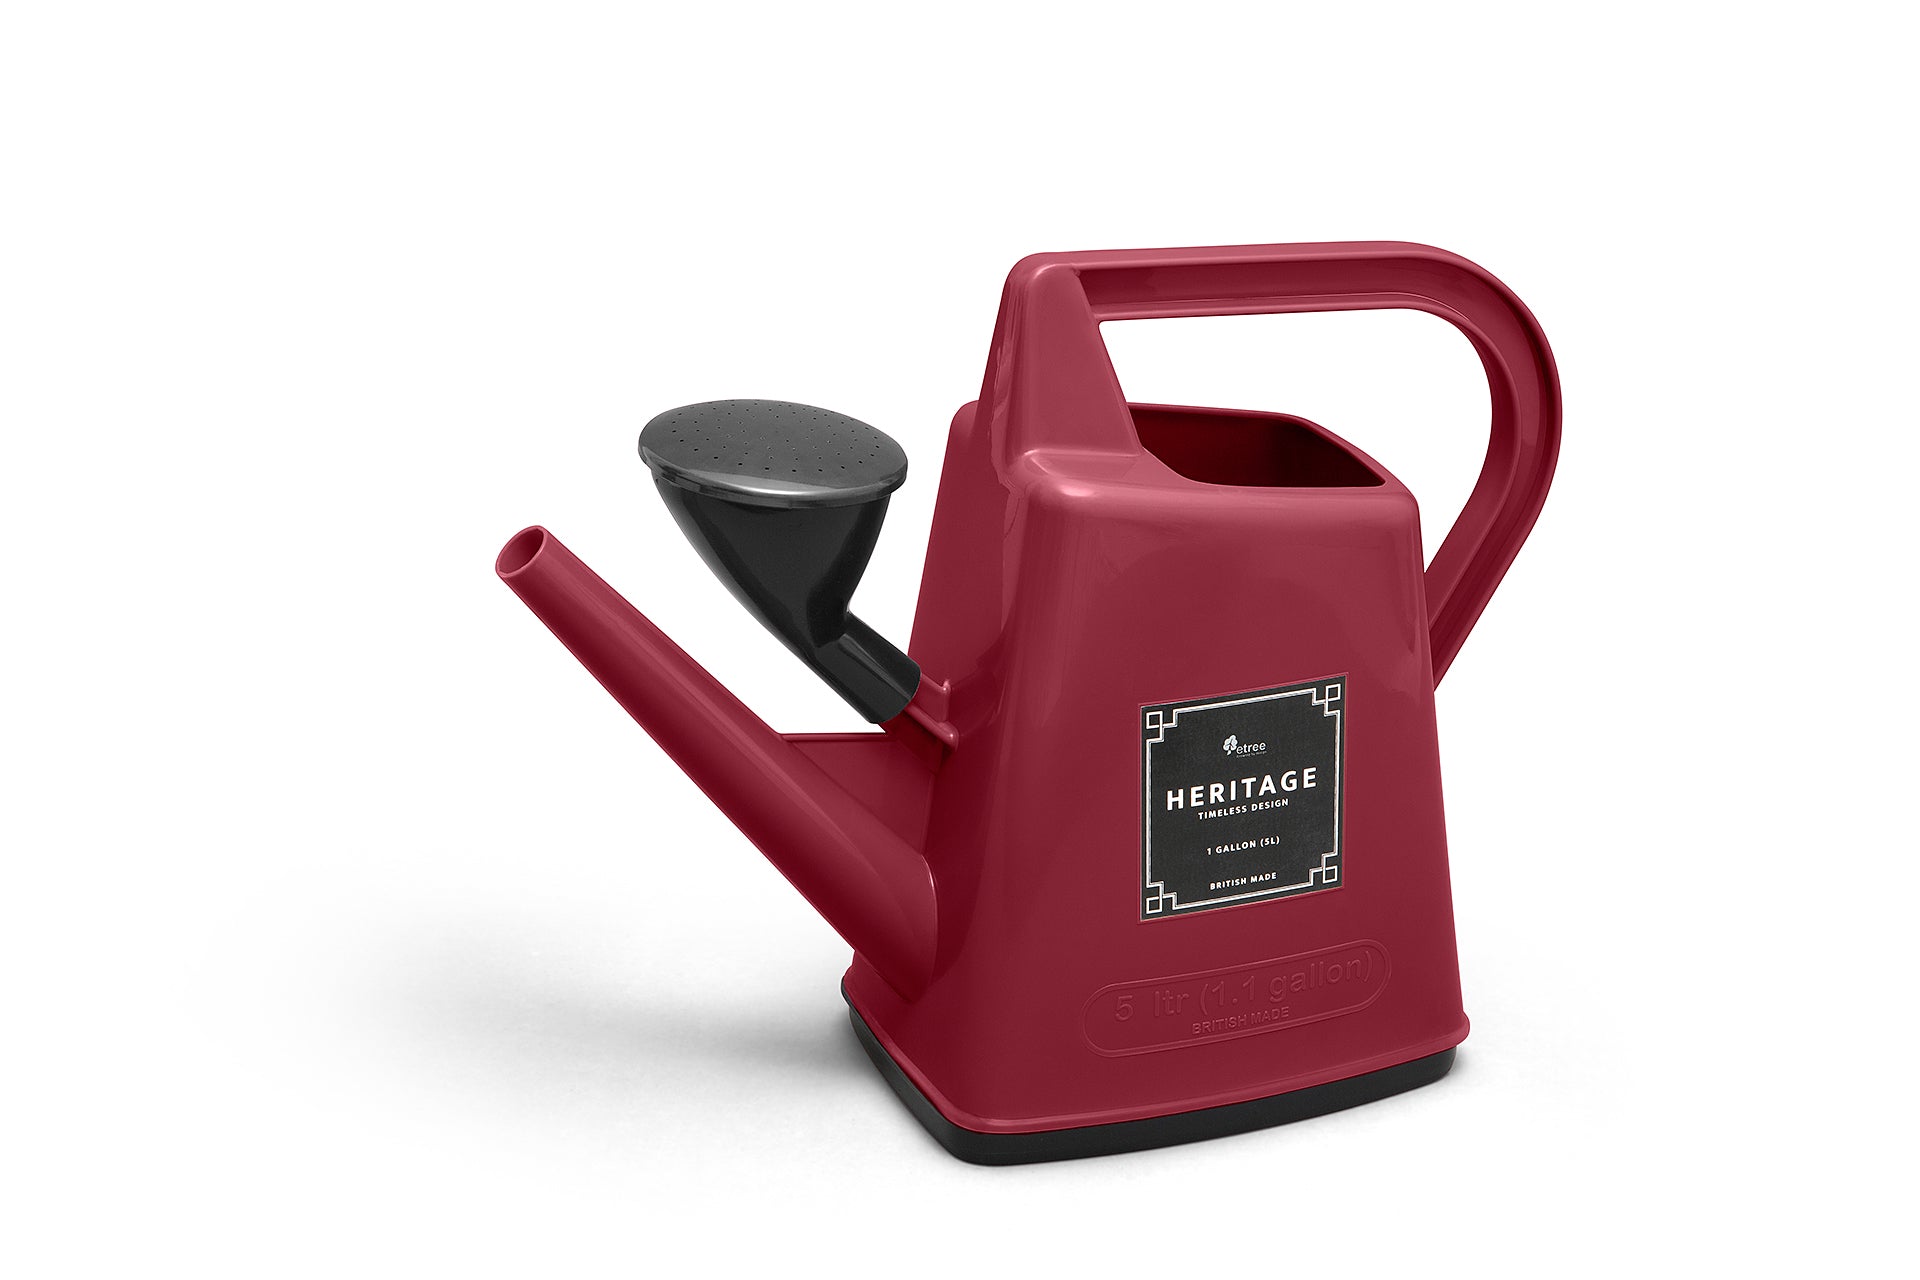 5 litre or 2 gallon red watering can with black detail for indoor or outdoor